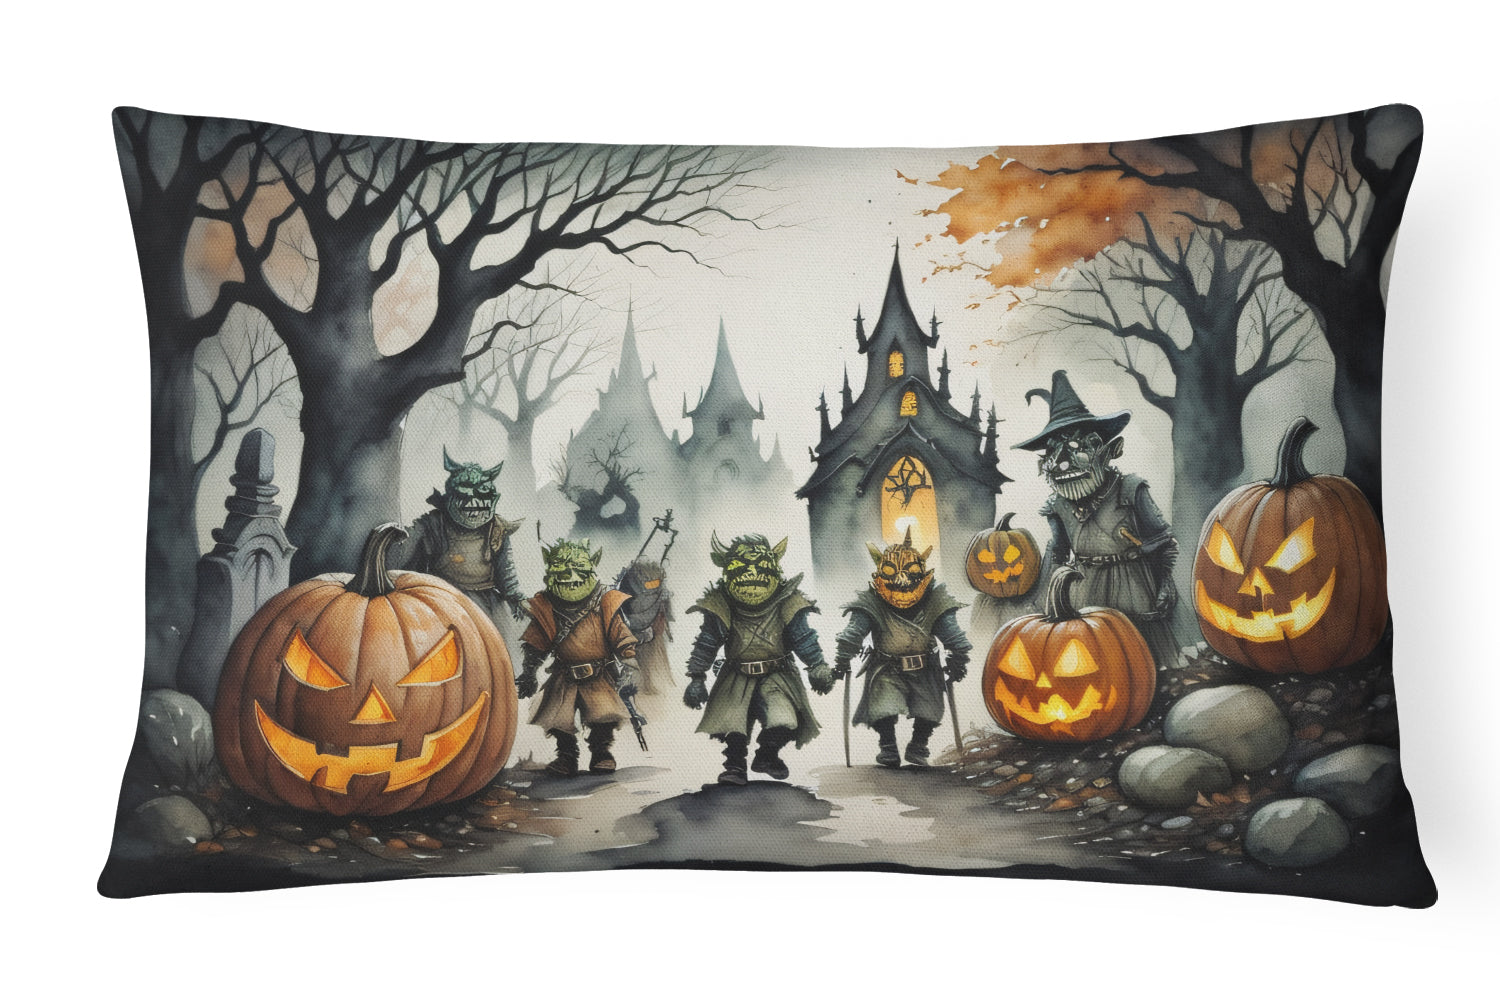 Buy this Orcs Spooky Halloween Fabric Decorative Pillow